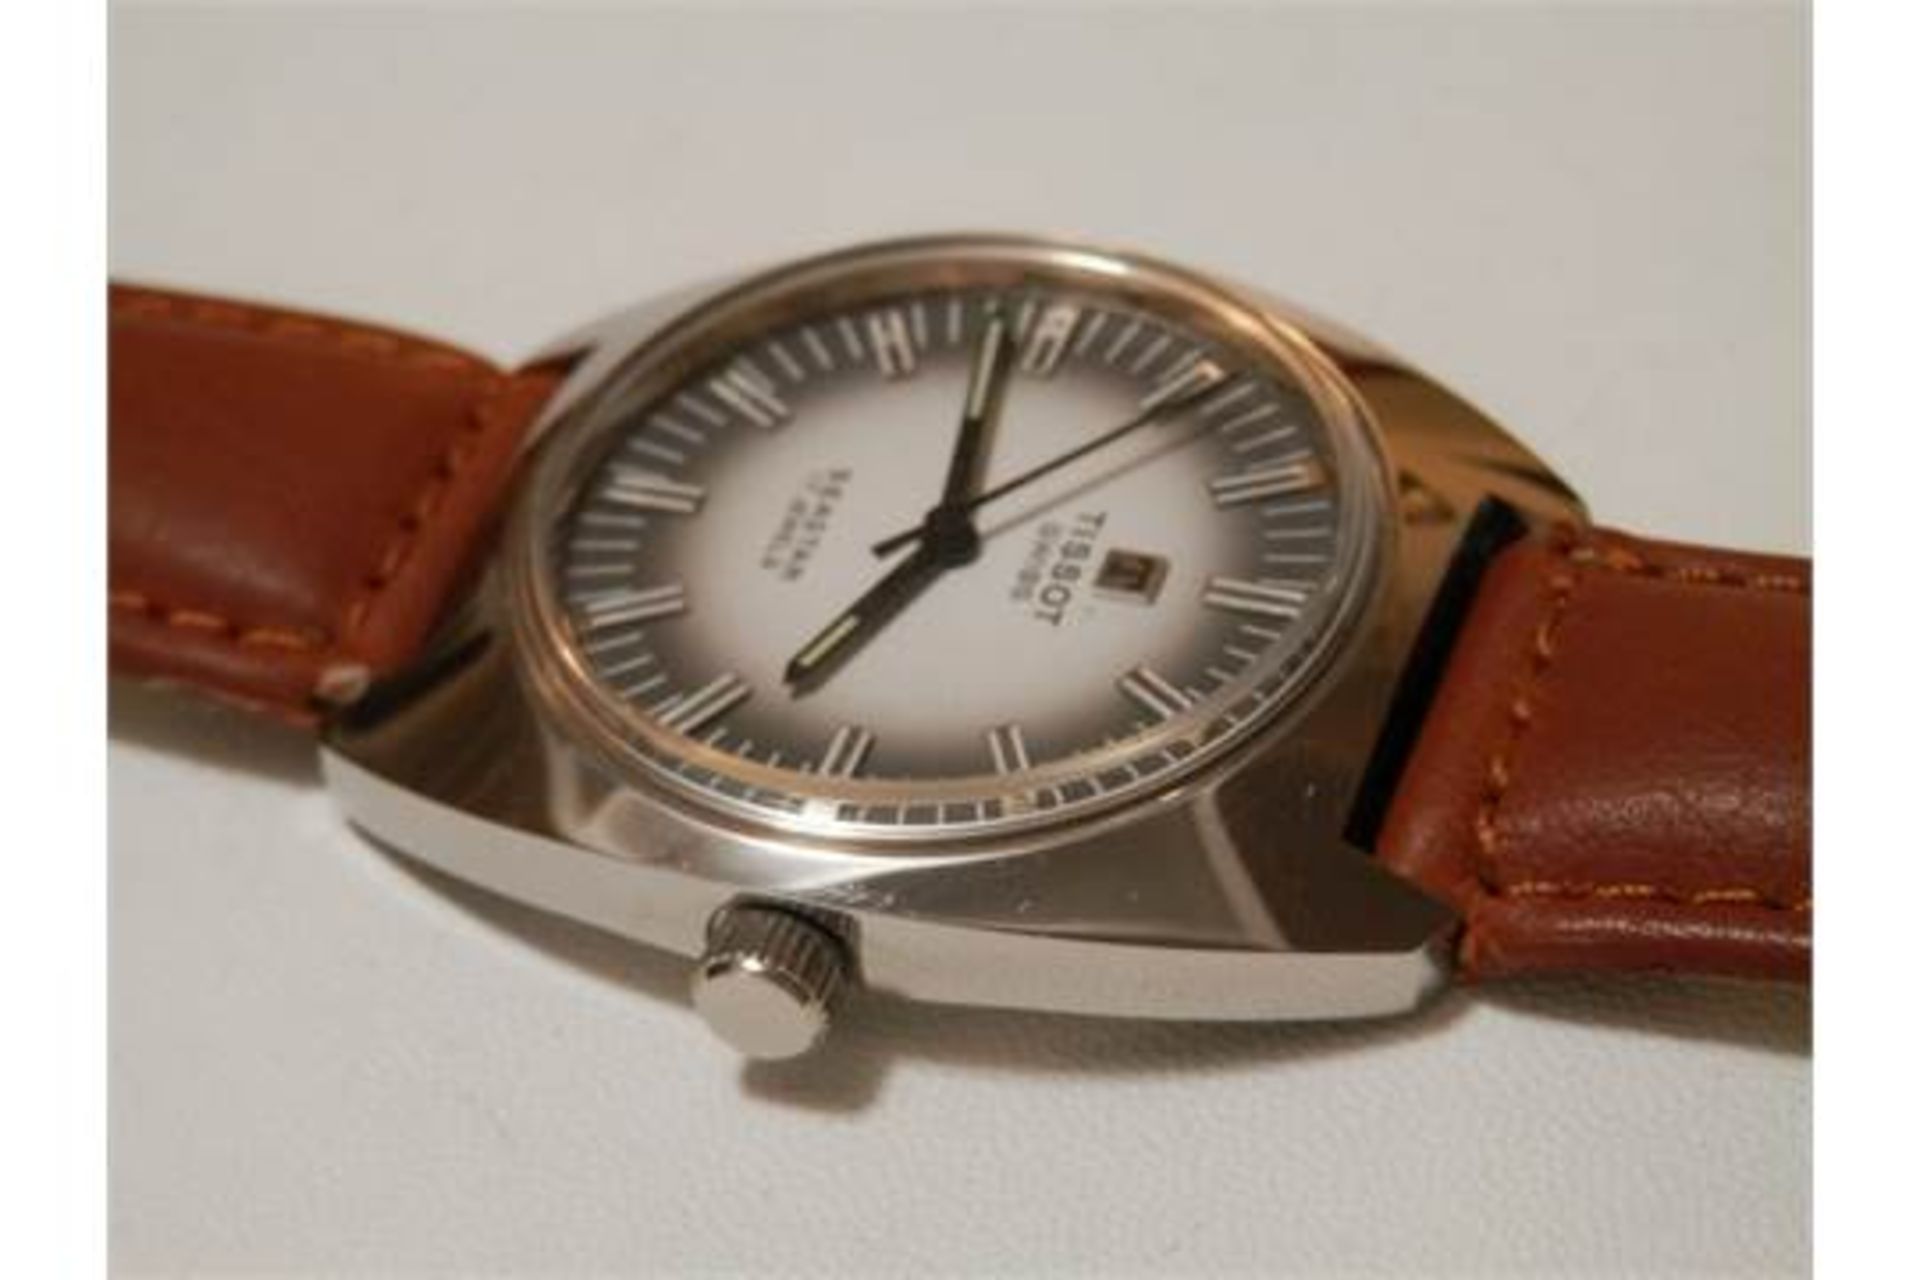 SUPERB GENTS TISSOT SEASTAR, POSSIBLY NEW/OLD STOCK 1970S 17 JEWEL SWISS WATCH (1 of 3 available) - Image 9 of 10